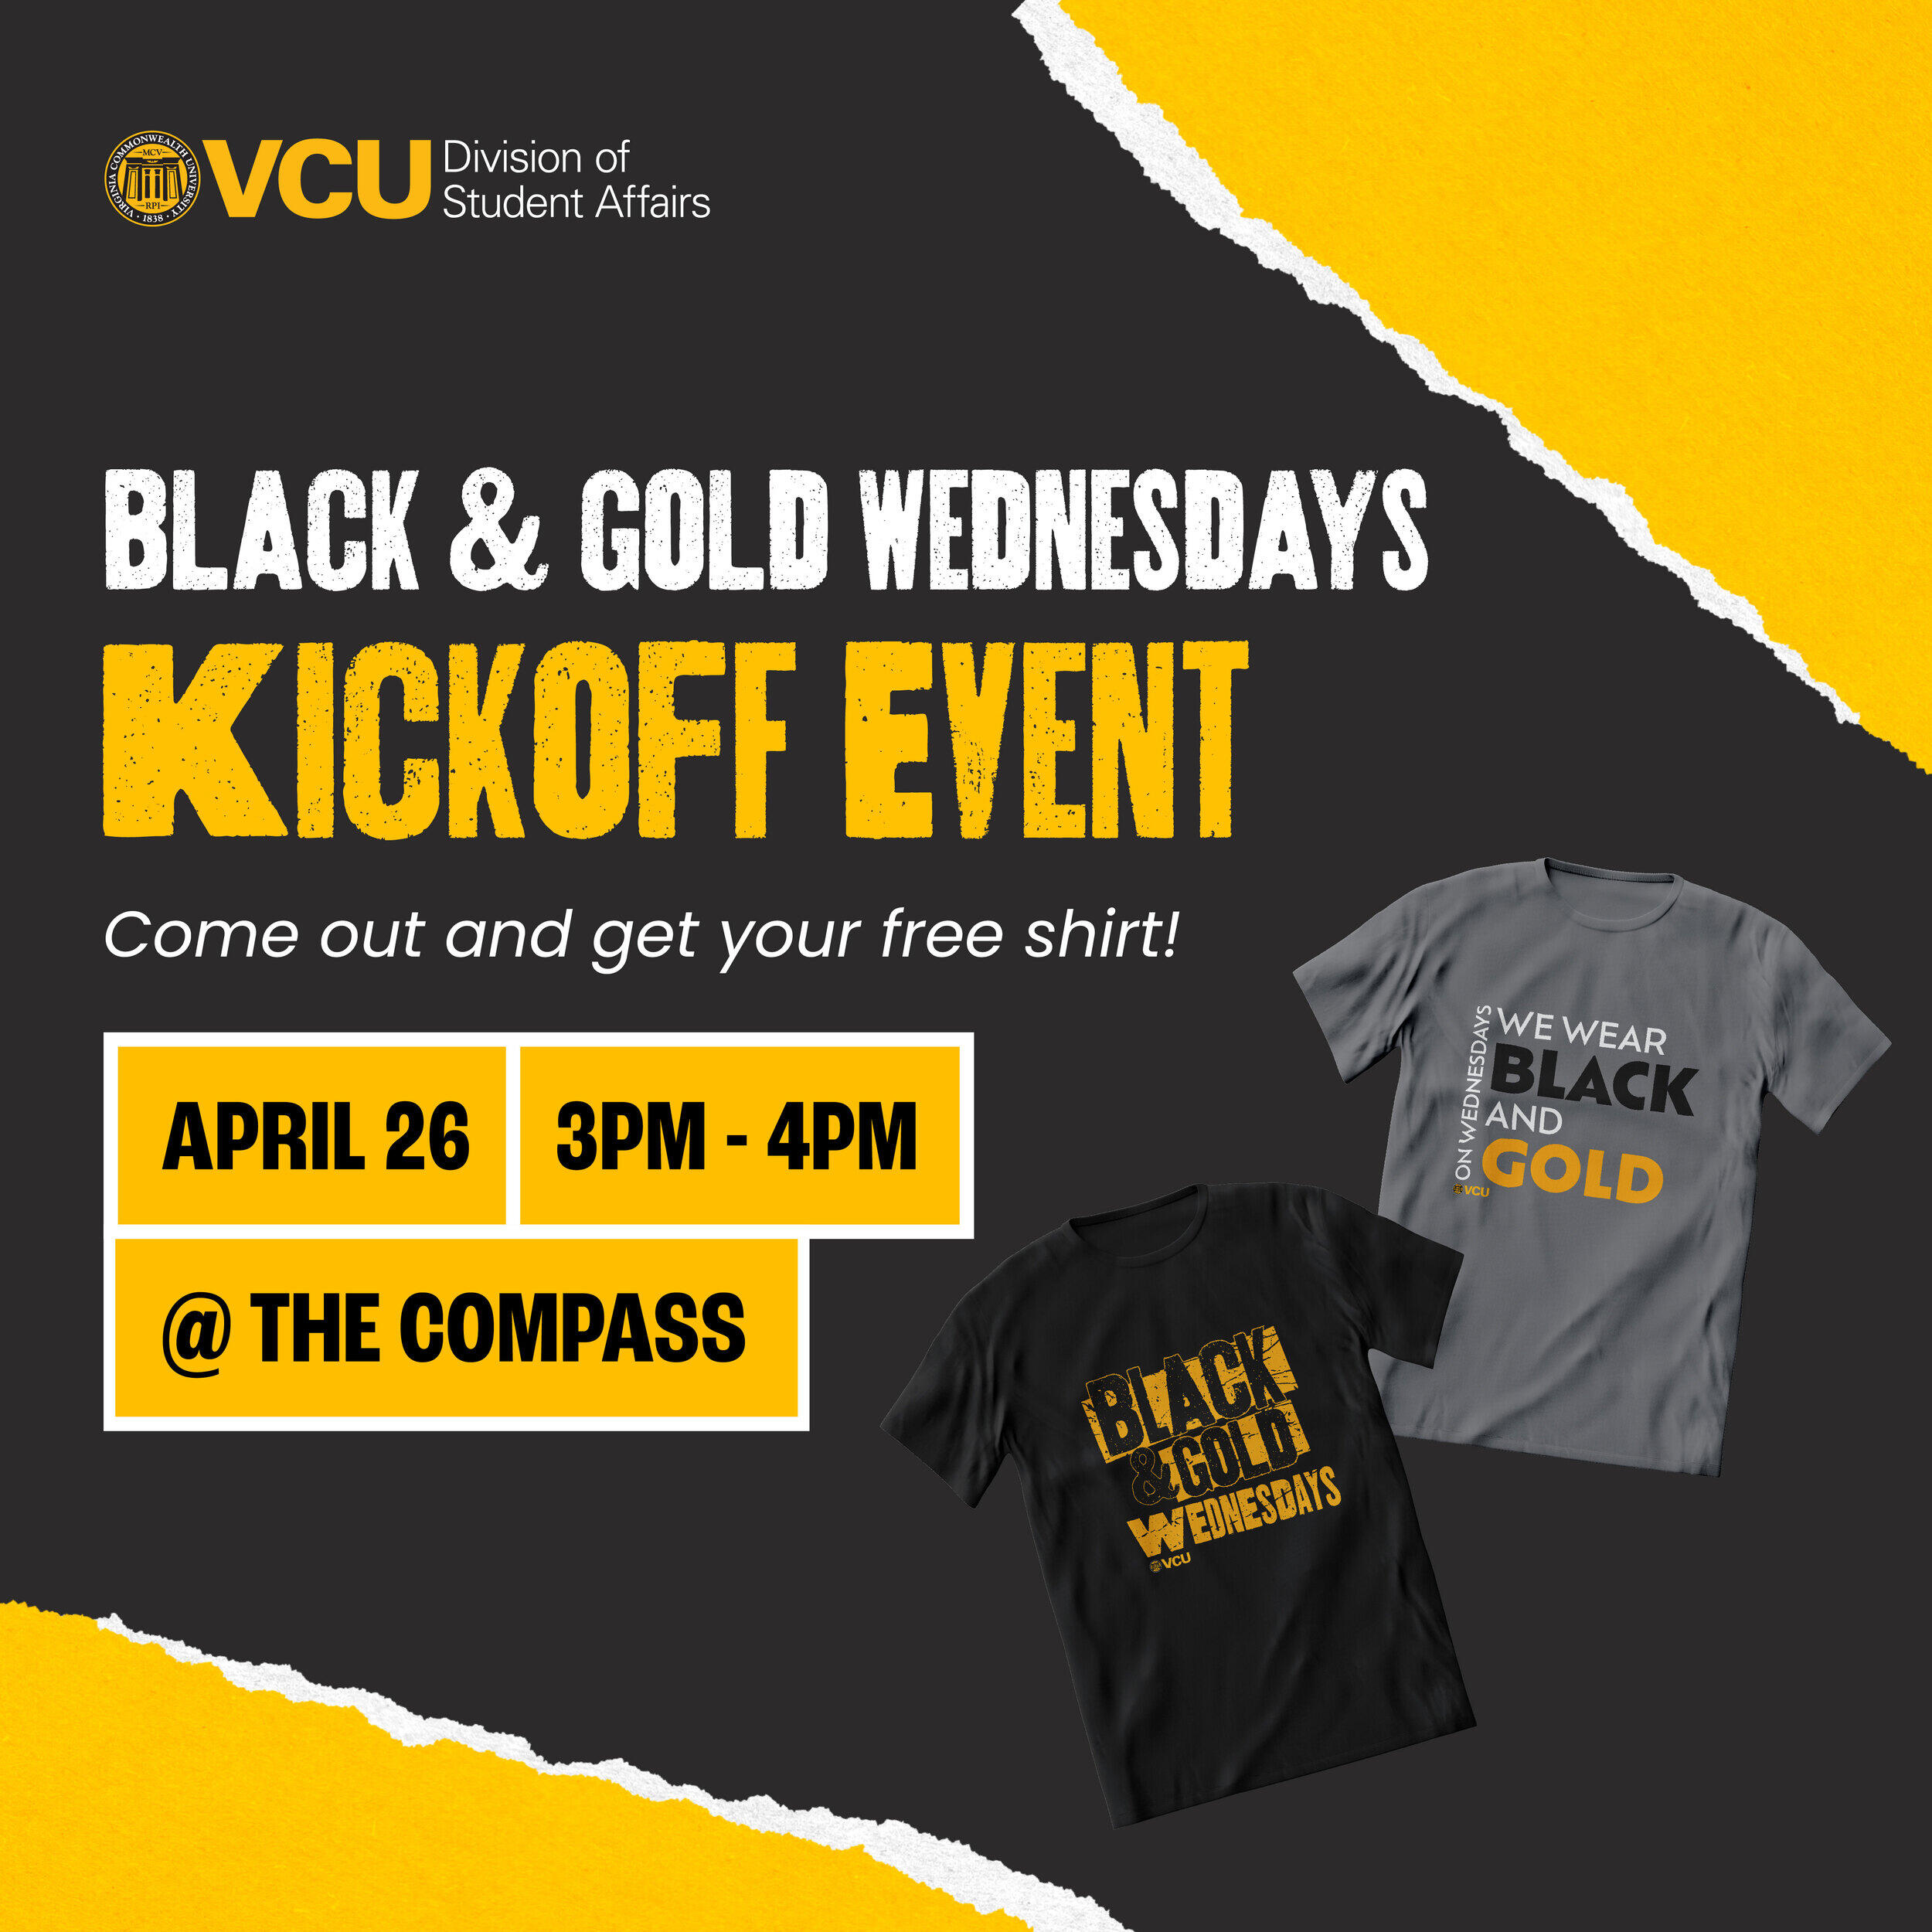 A poster with a black and yellow background and images of two t-shirts on it. The poster reads \"BLACK & GOLD WEDNESDAYS KICKOFF EVENT Come out and get your free shirt! APRIL 26 3PM-4PM @ THE COMPASS\"